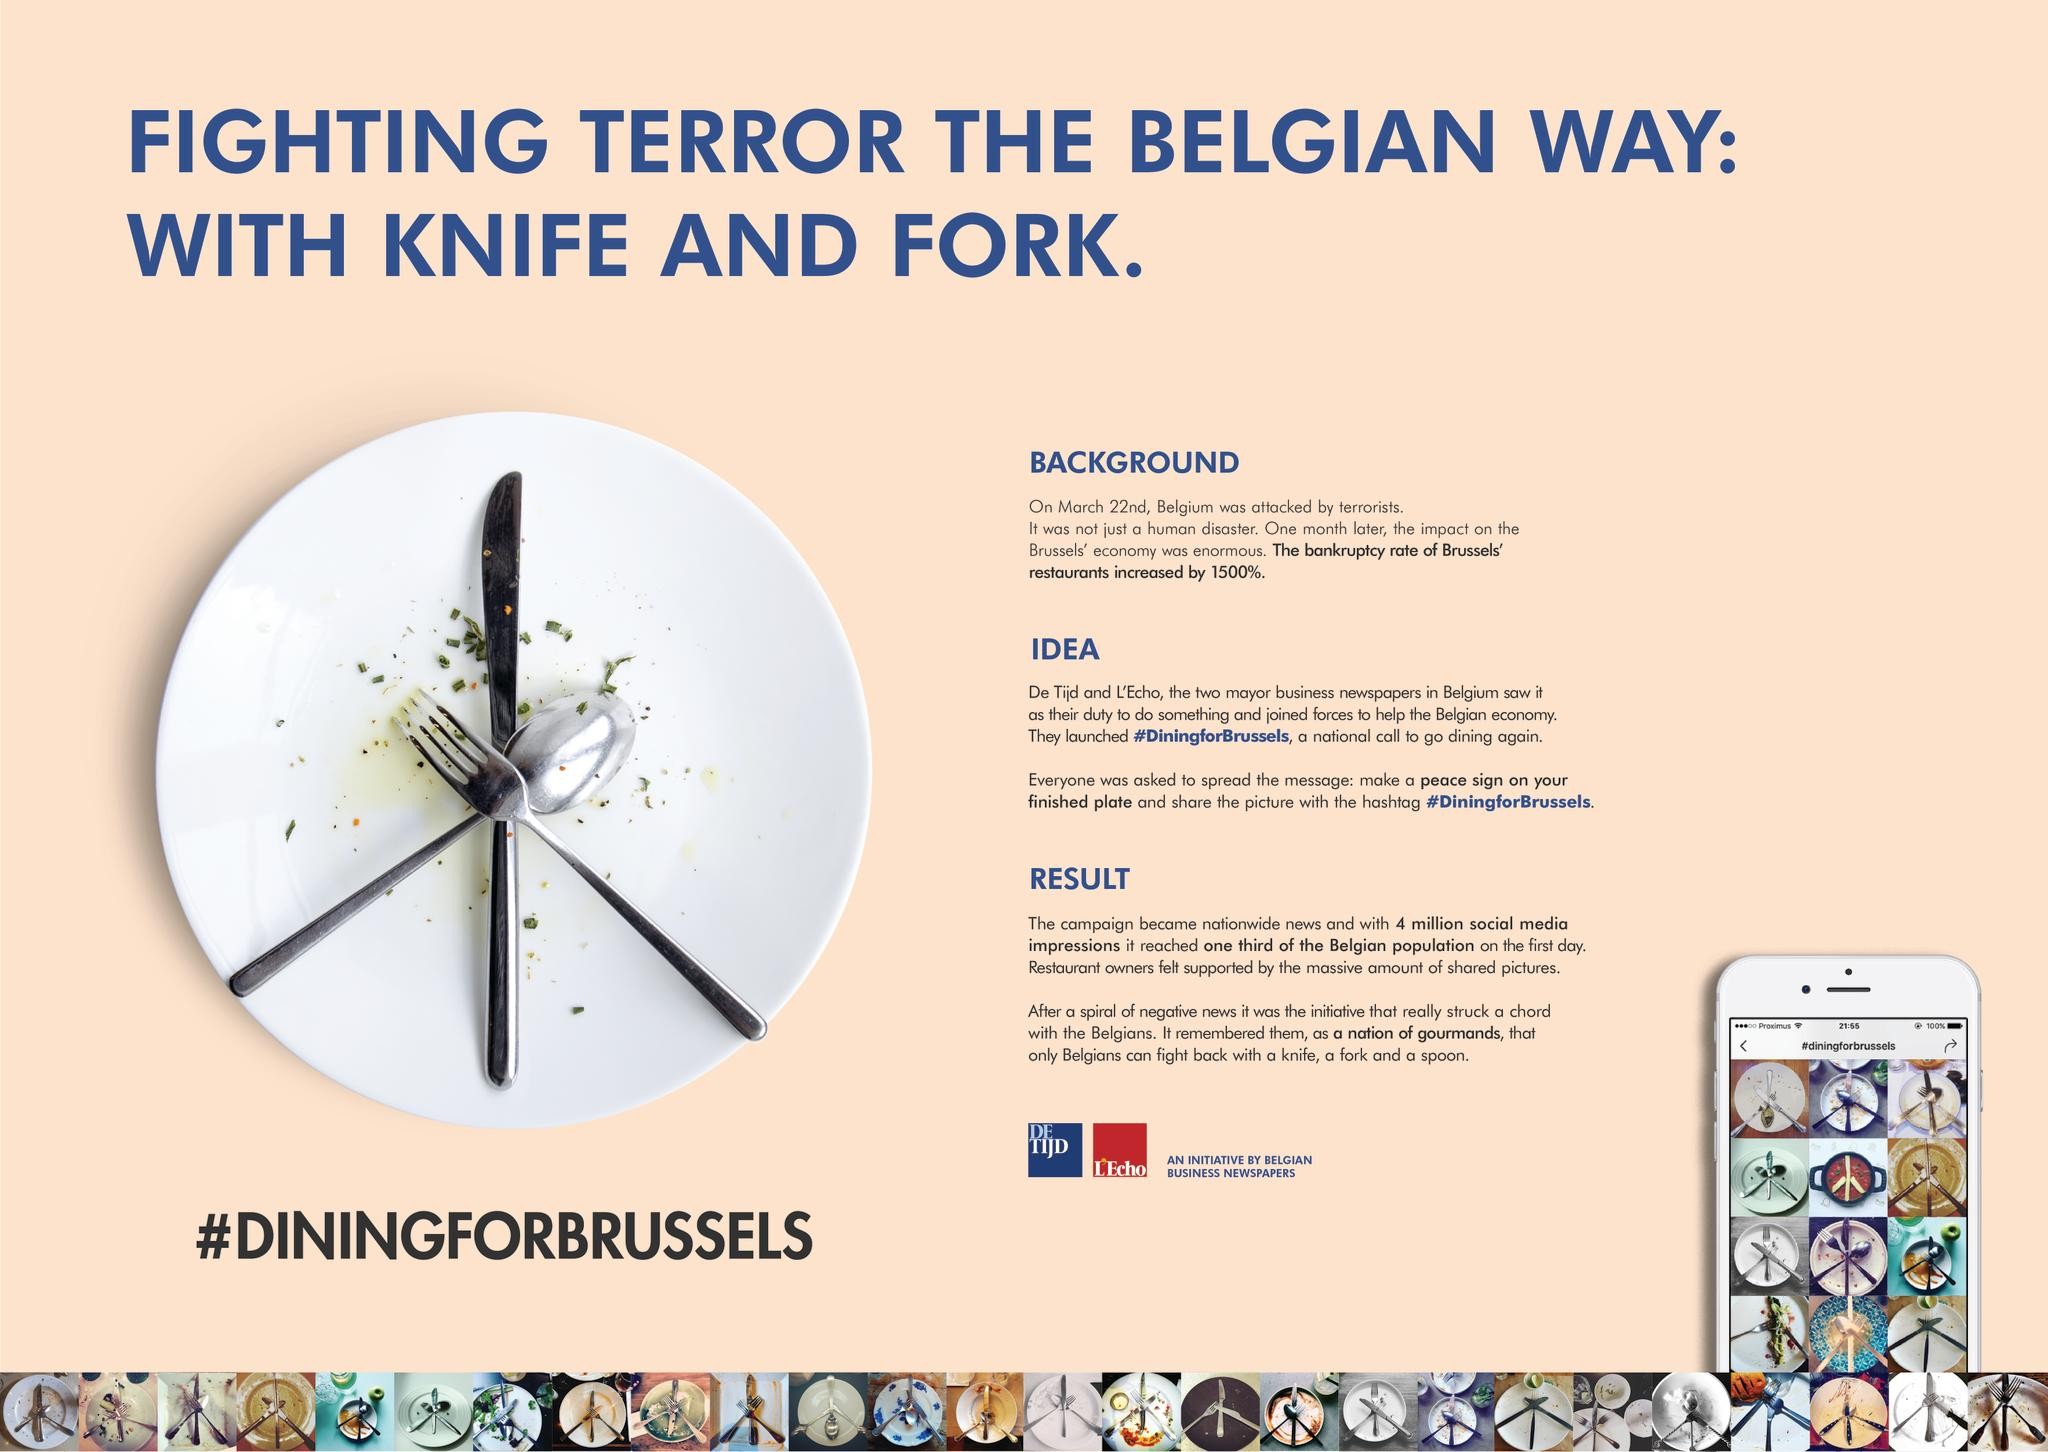 DINING FOR BRUSSELS